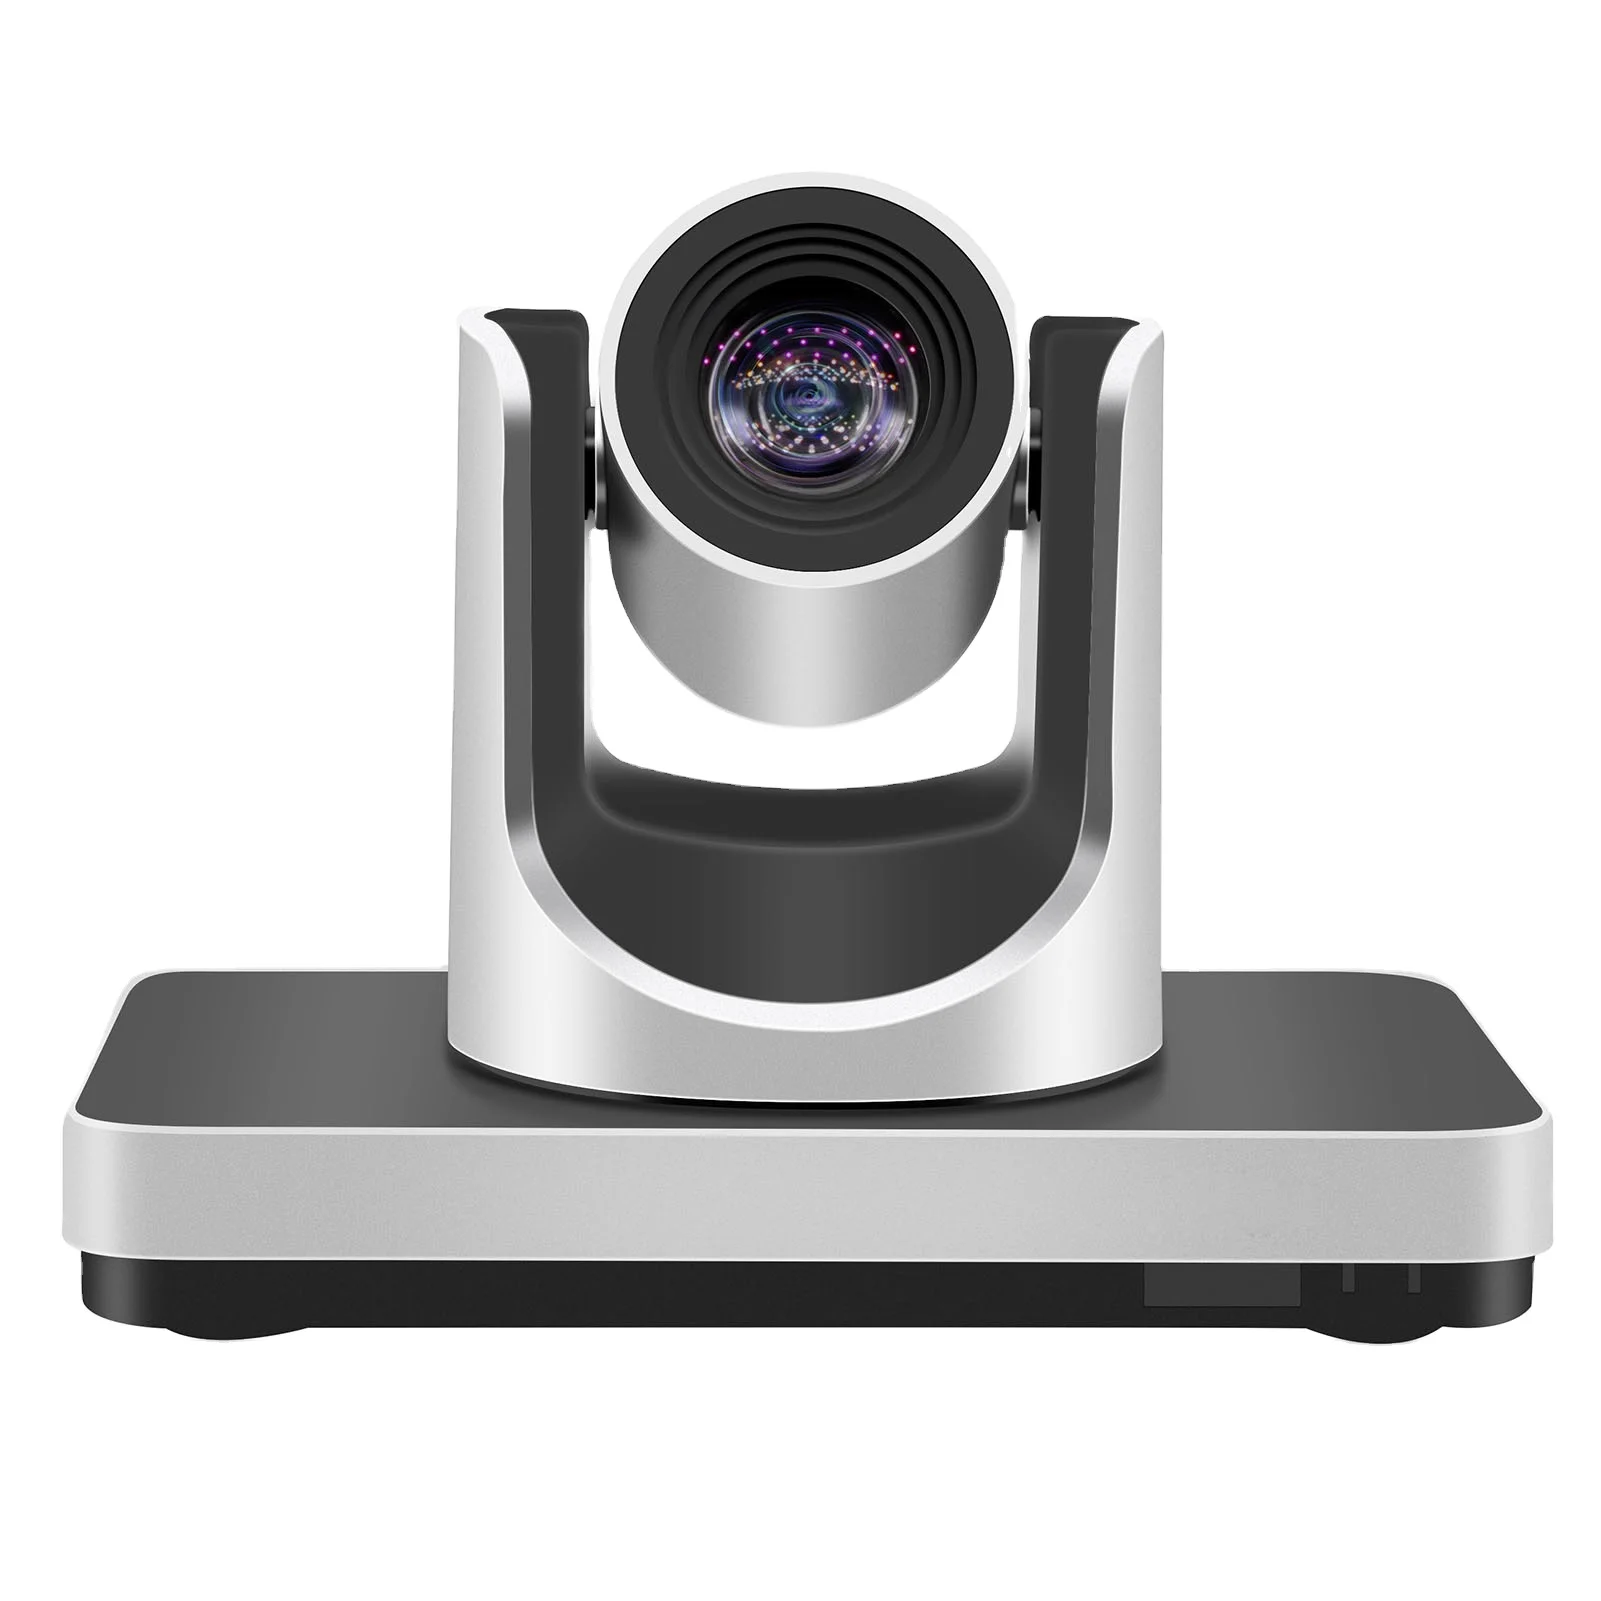 

Boutique BV20-N Full HD Conference Web Camera 1080P Wireless Camera